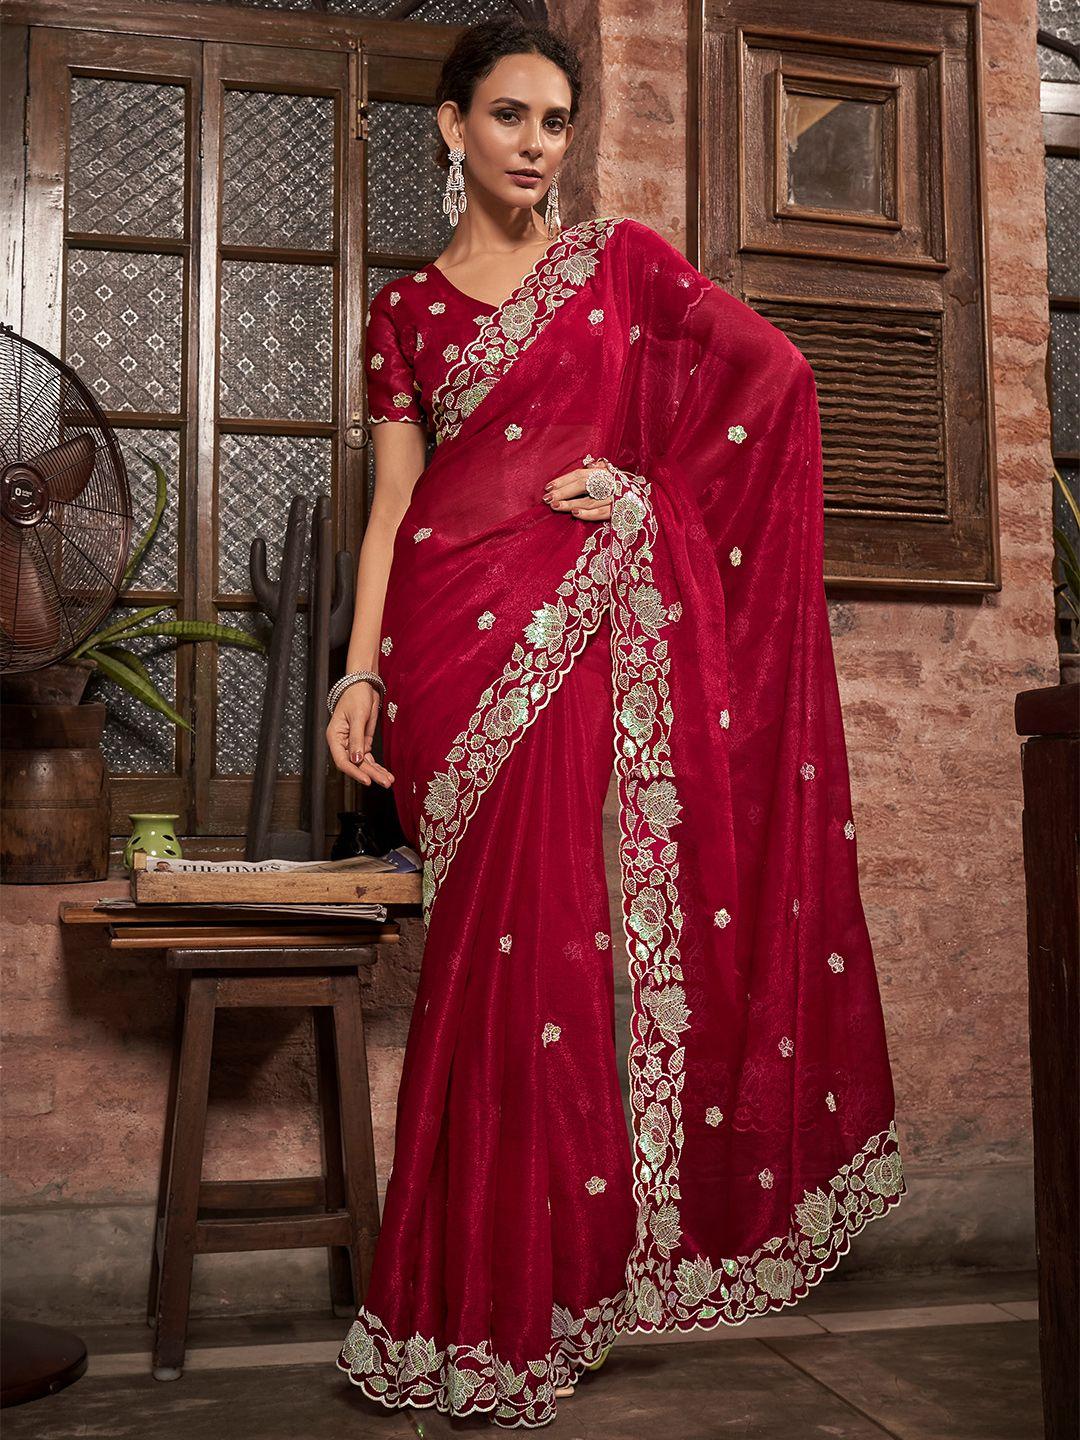 mitera-red-&-gold-toned-floral-embroidered-pure-chiffon-saree